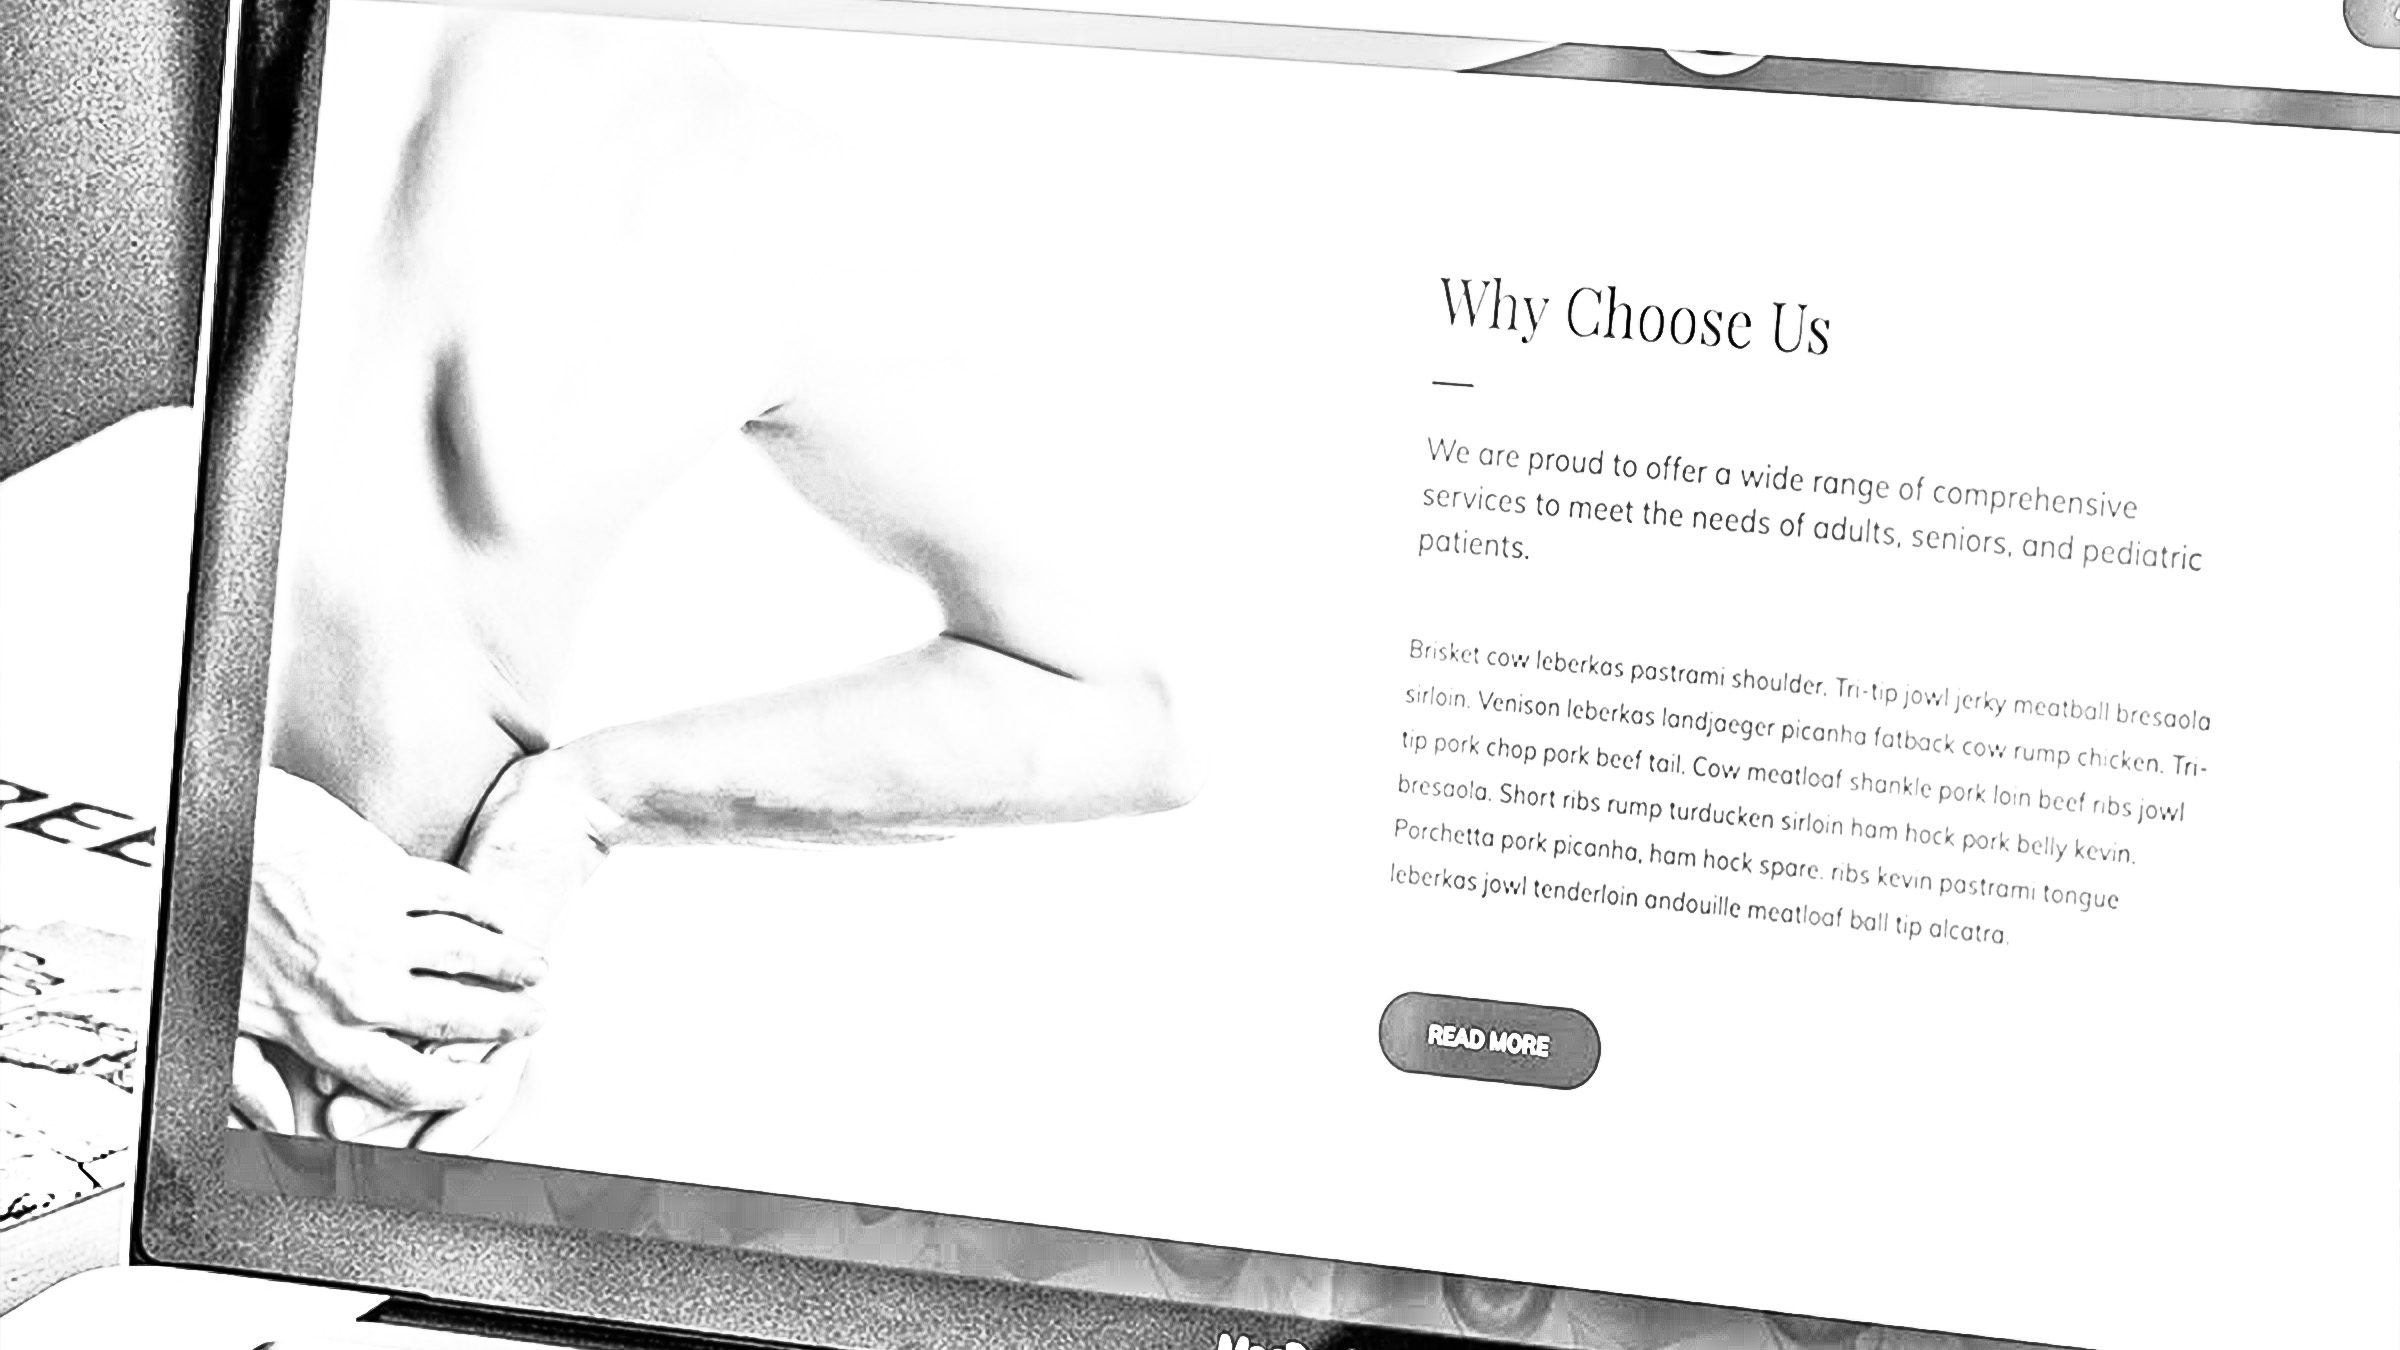 Creating an Award-Winning Website Design For Your Quality Chiropractic Services